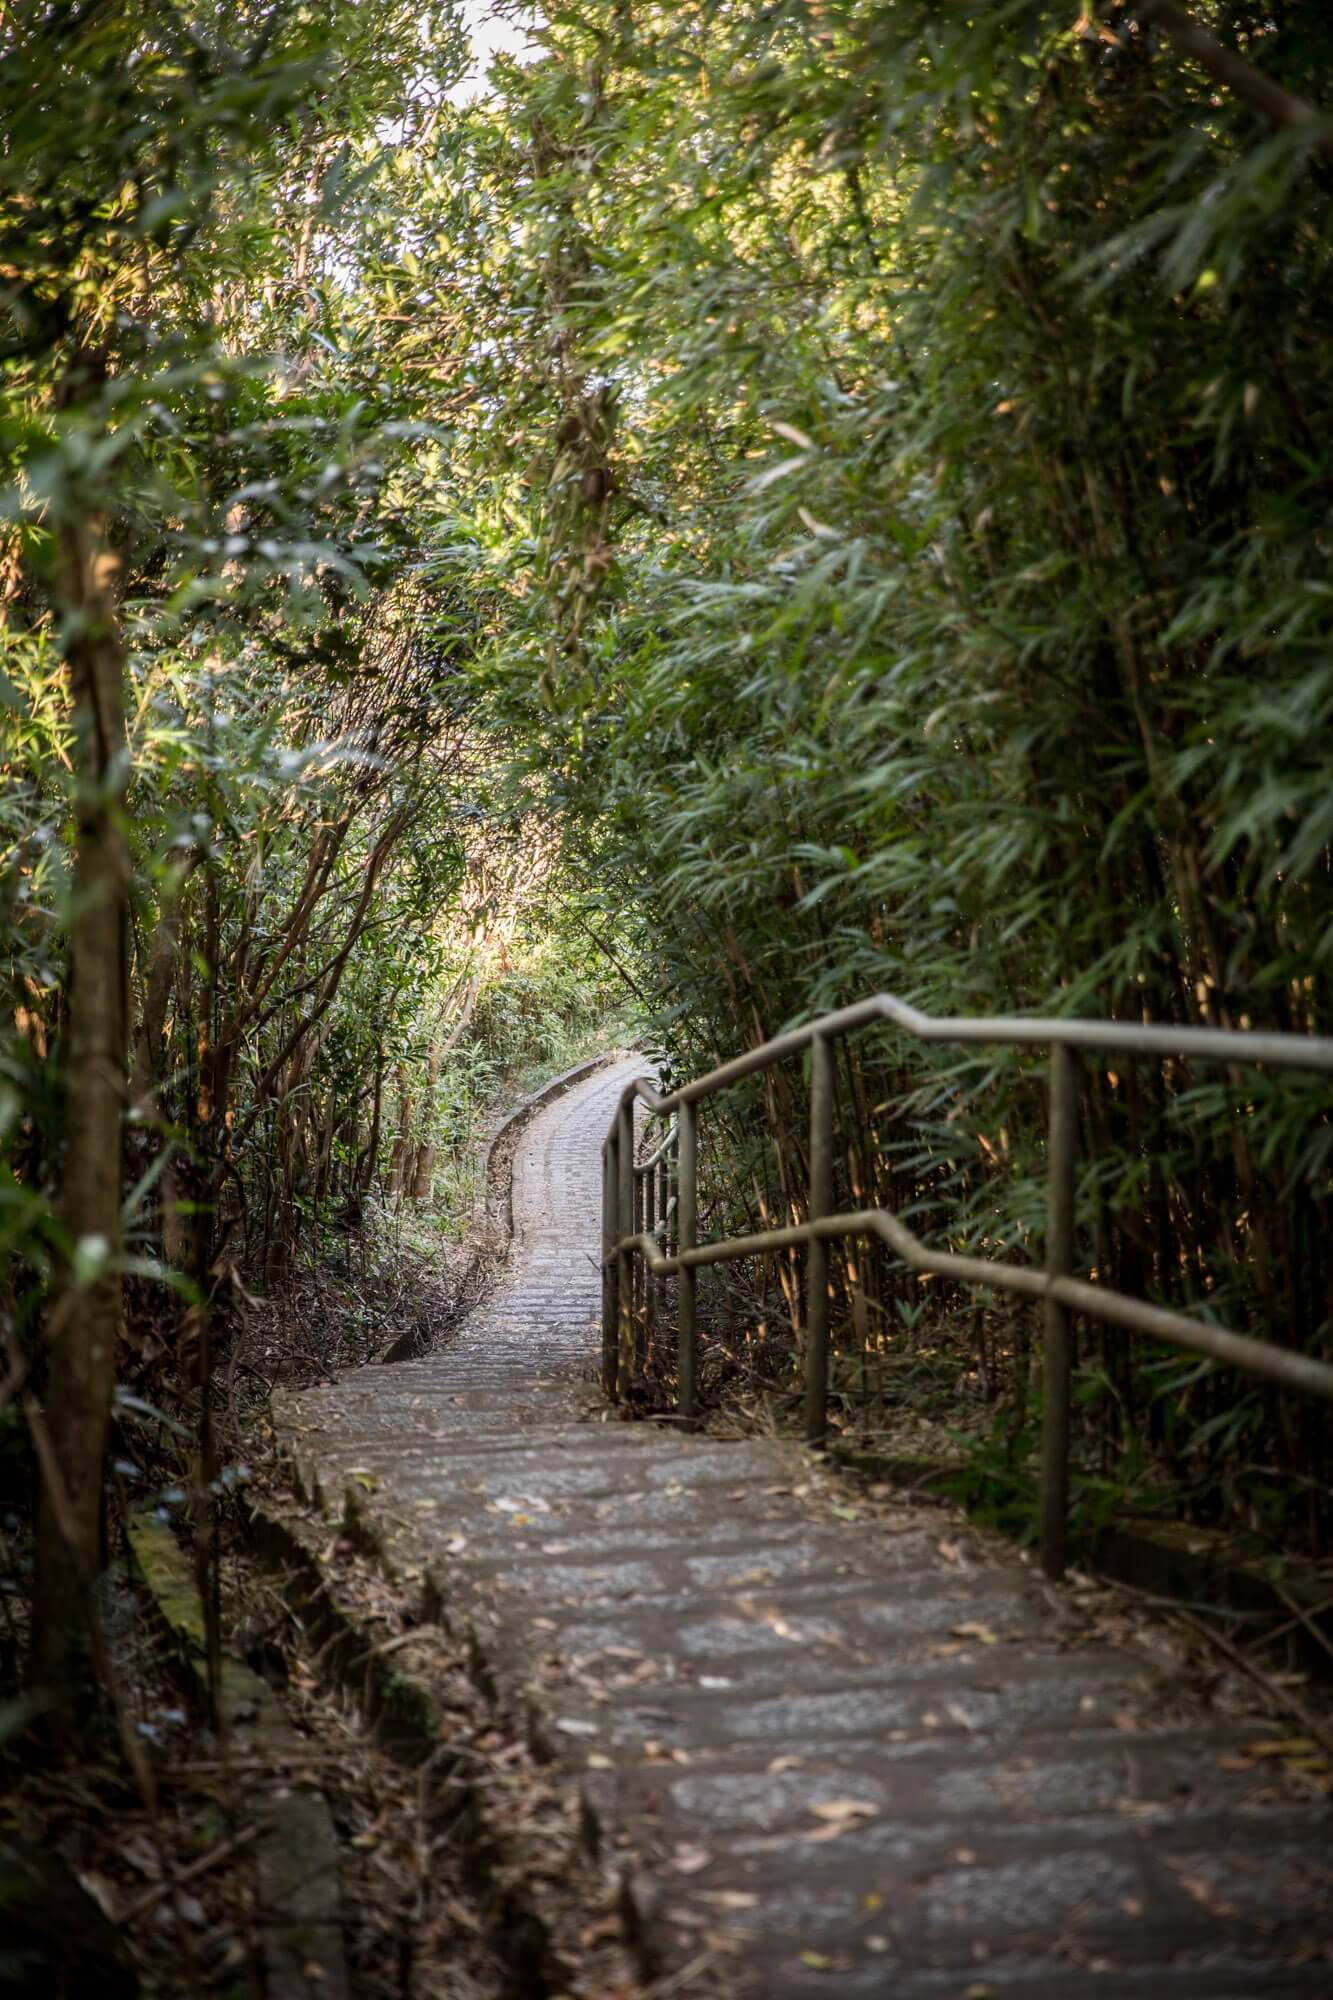 The Lung Fu Shan Fitness Trail section of the Morning Trail in Hong Kong